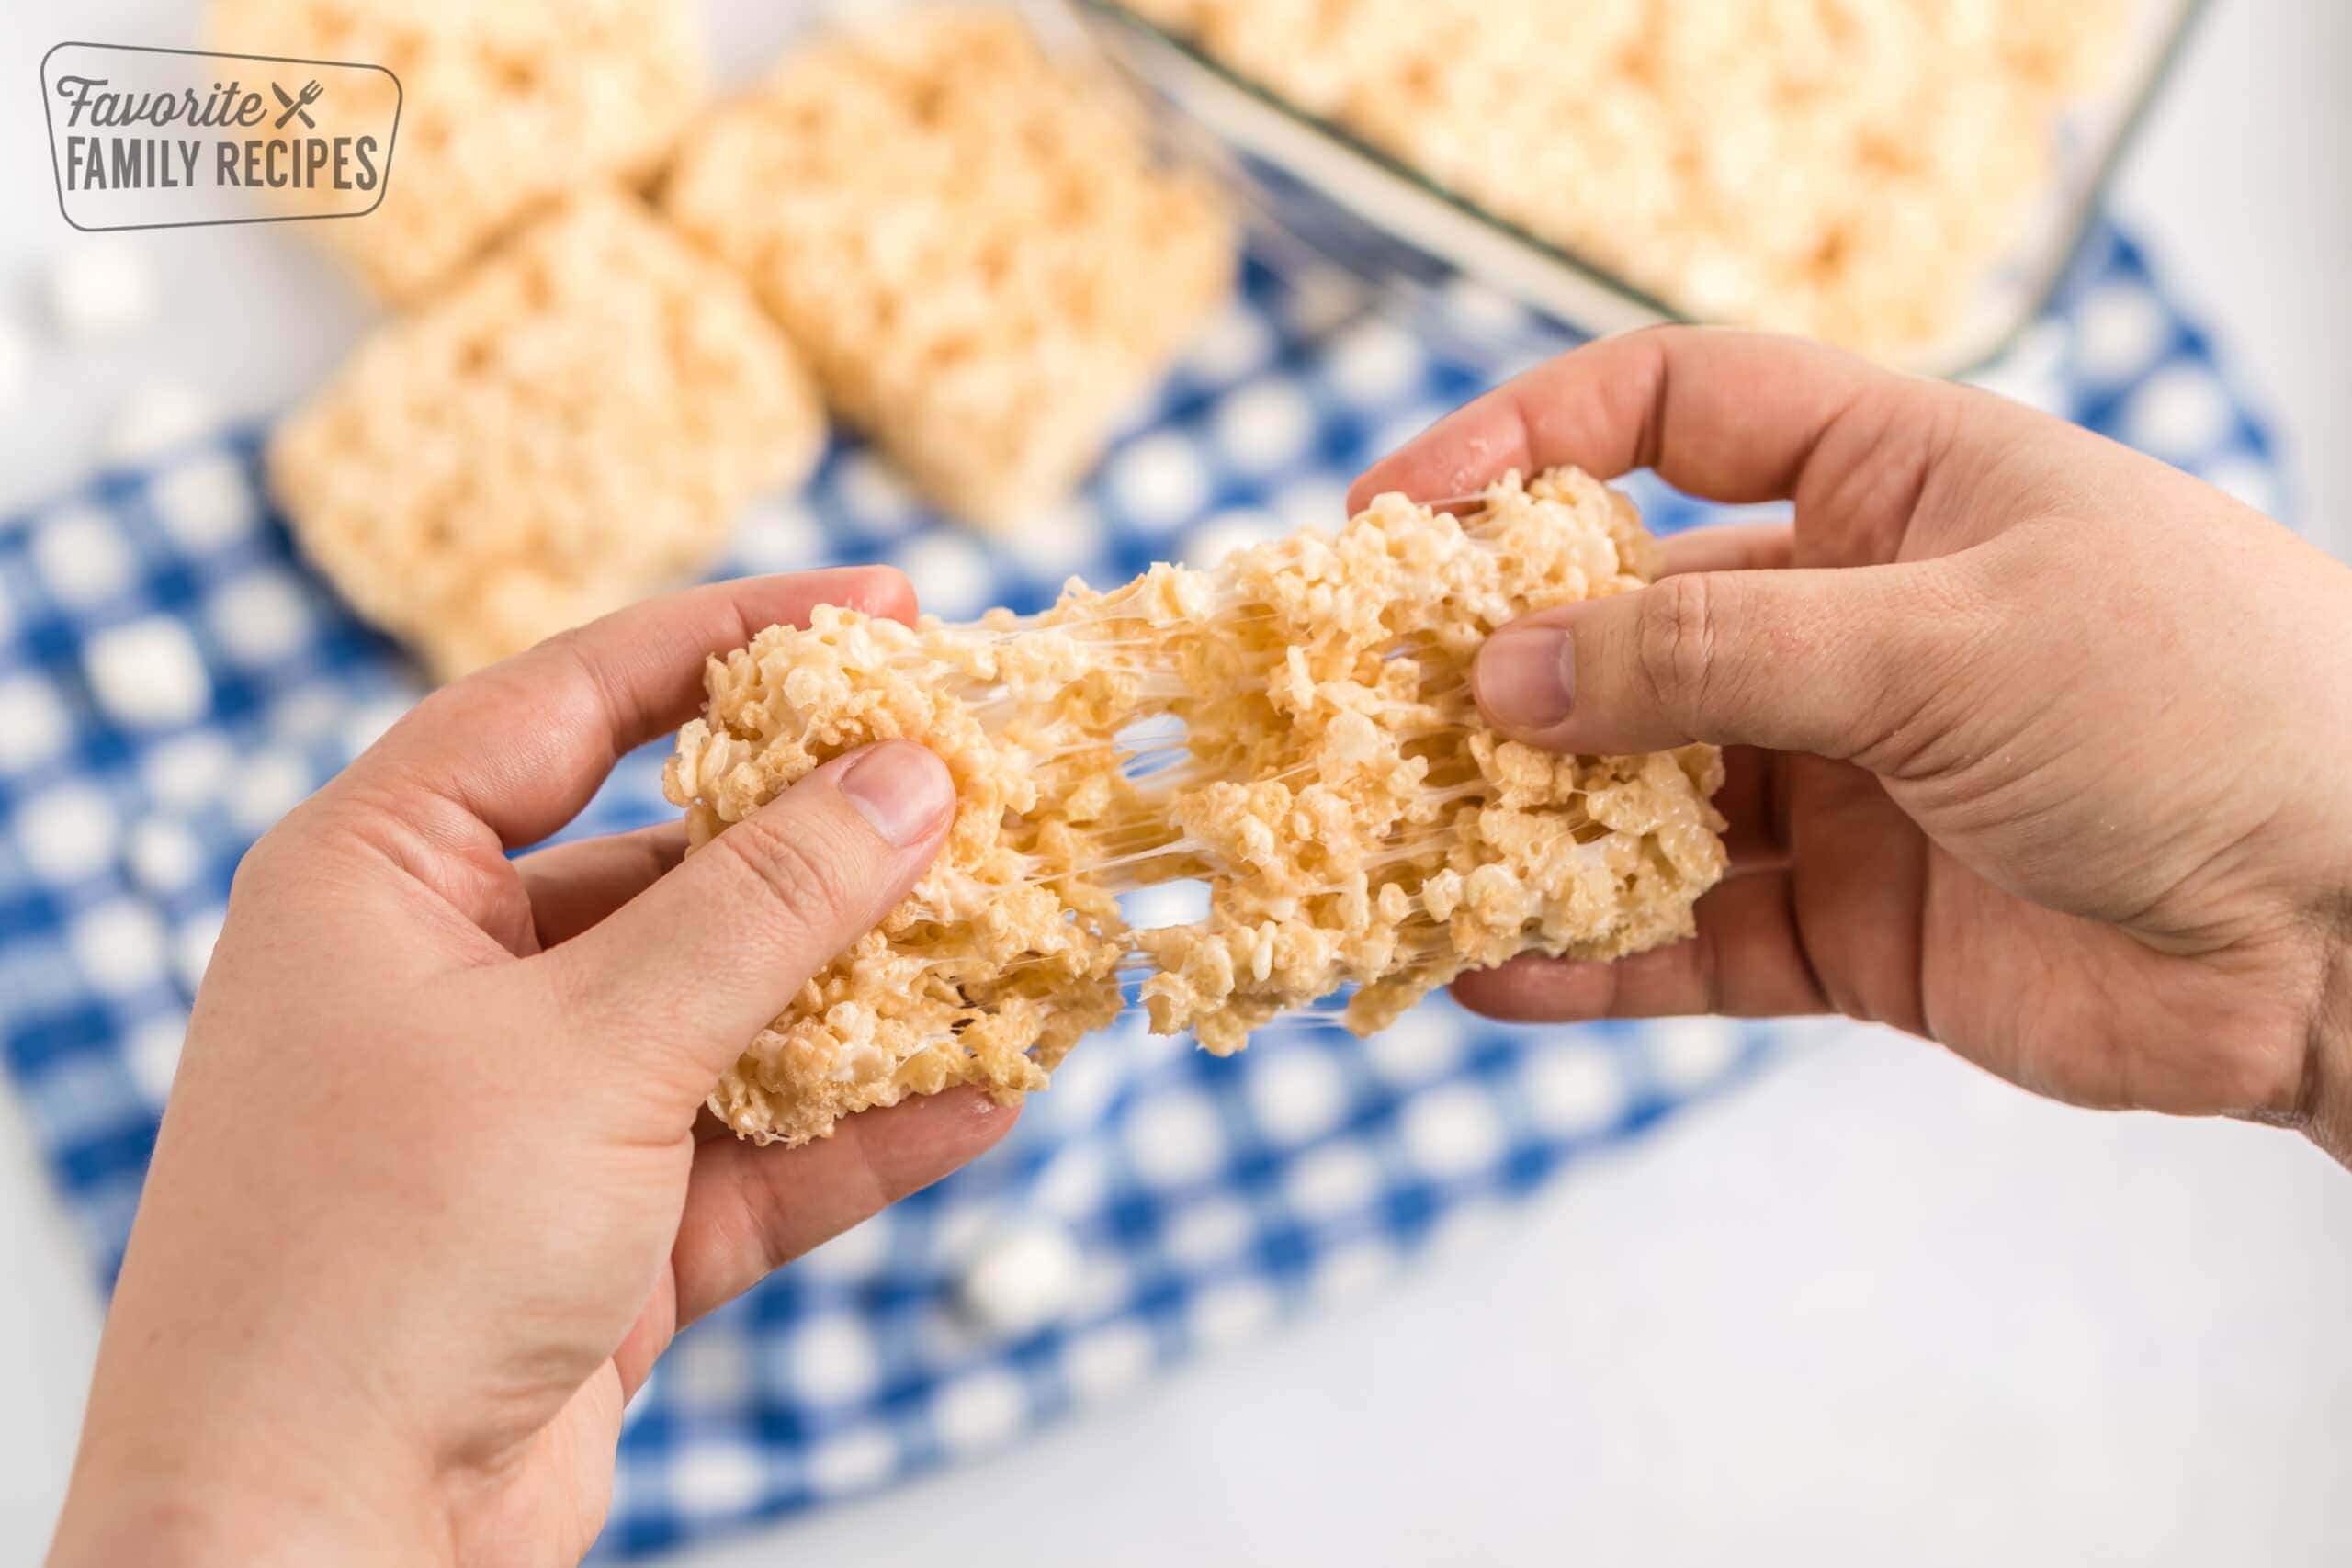 Two hands pulling apart a rice krispie treat with gooey marshmallow stretching in between the two pieces